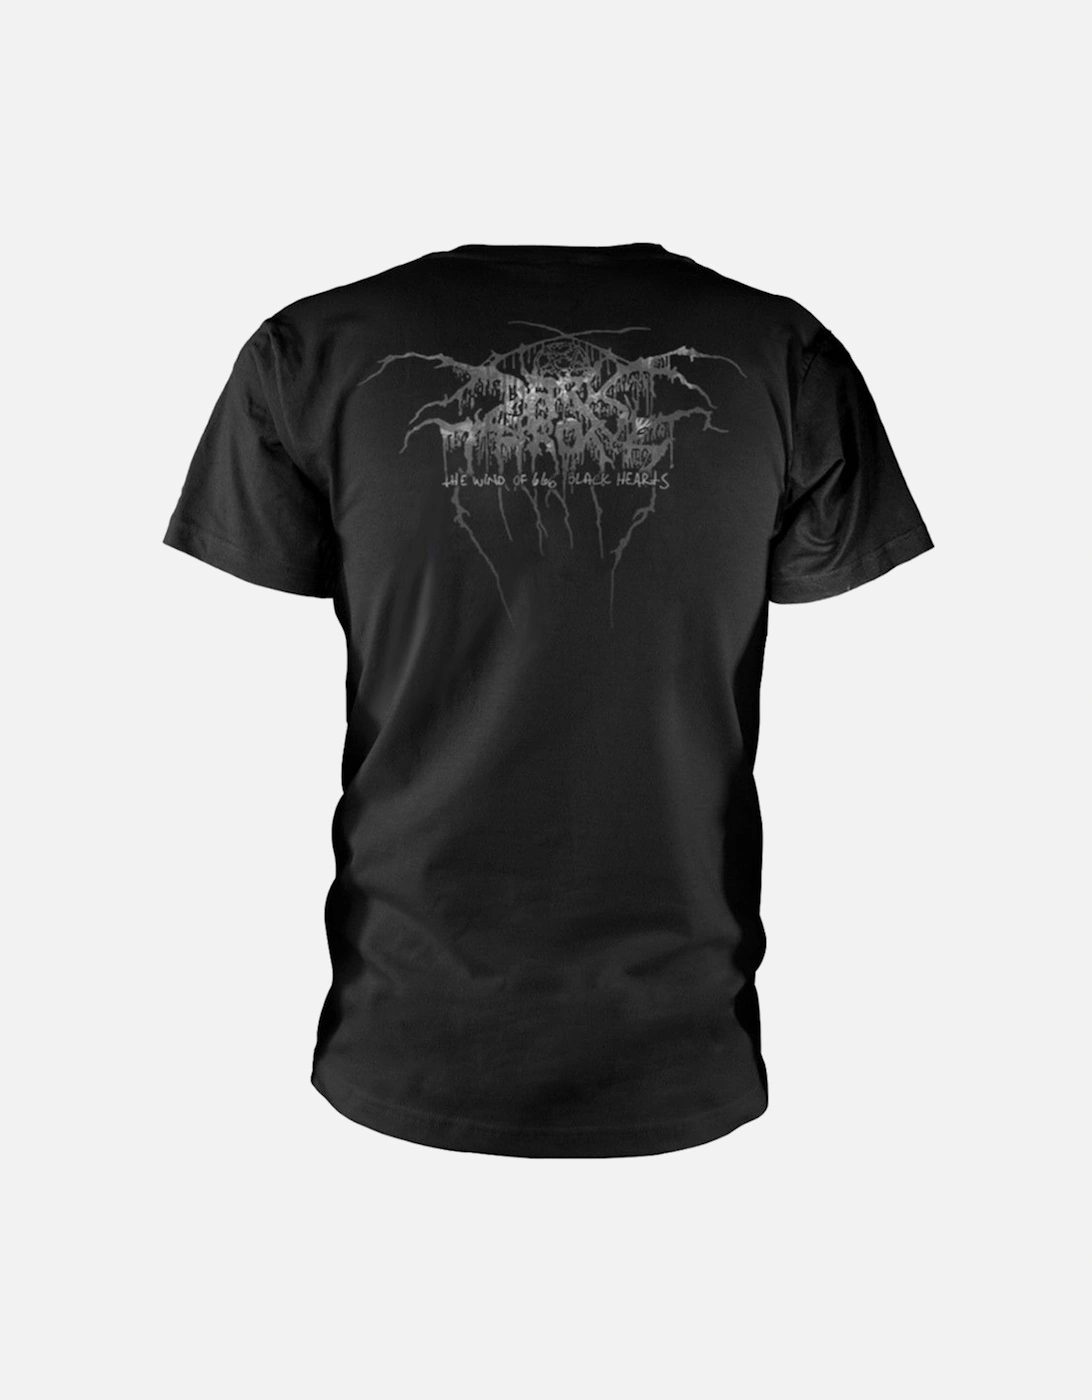 Unisex Adult The Winds Of 666 Black Hearts Album T-Shirt